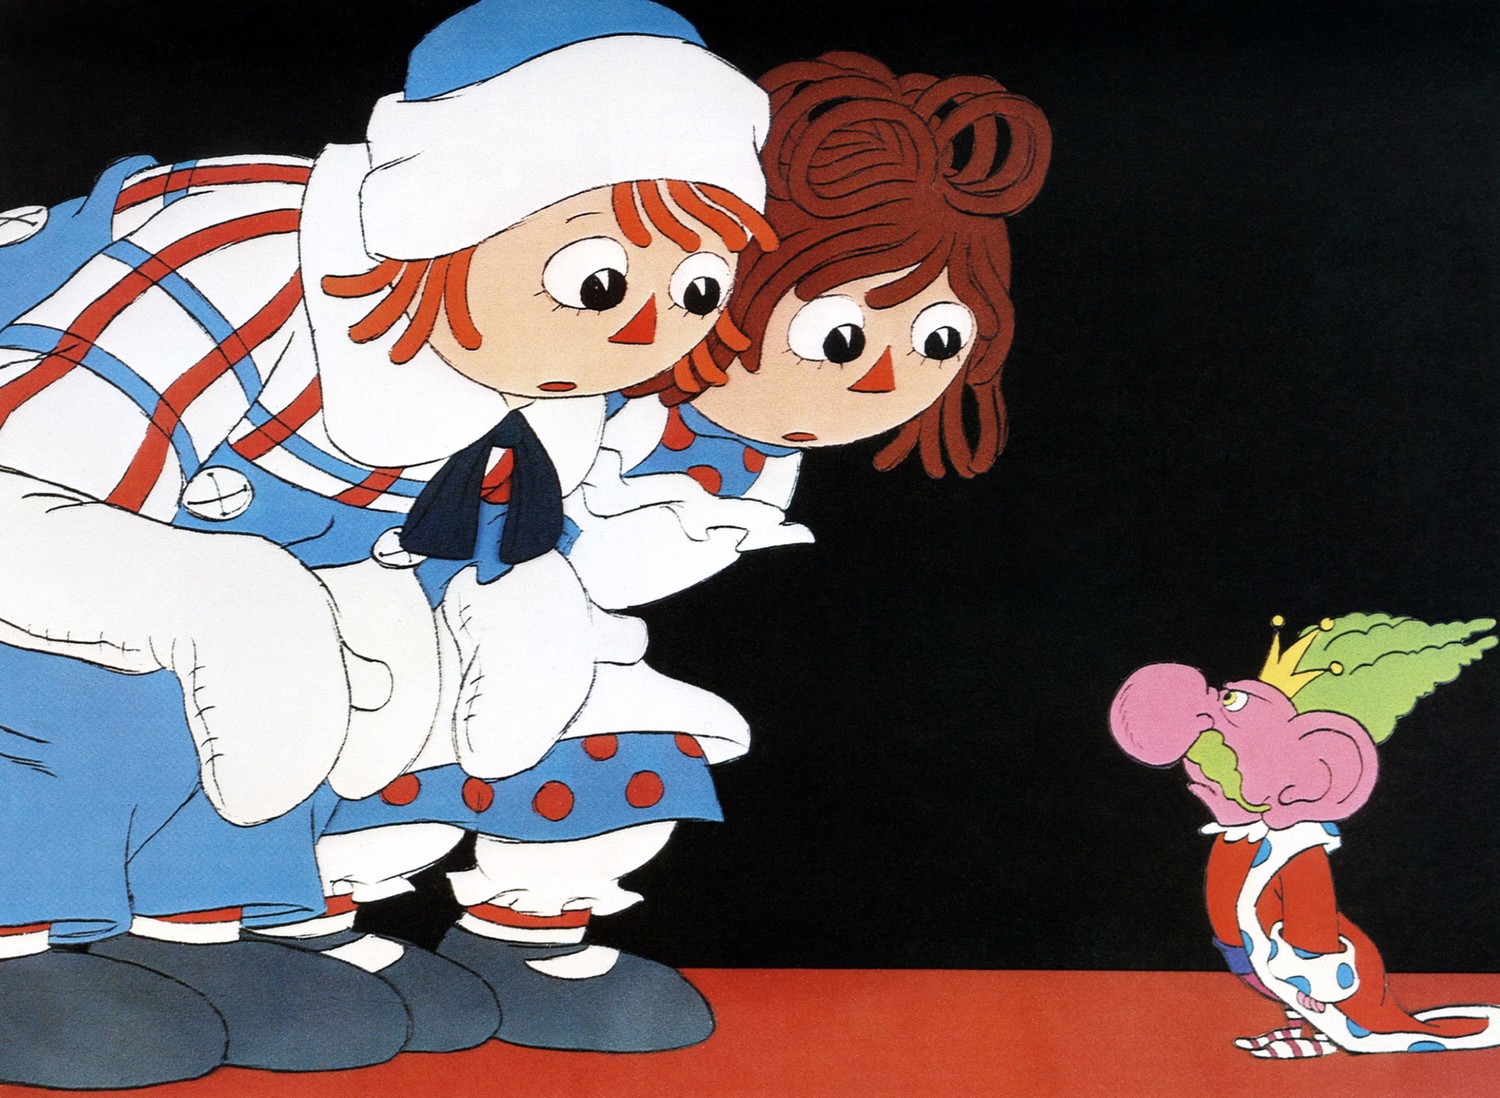 For those of us who grew up in 1970s, Raggedy Ann and Andy merchandise was ...